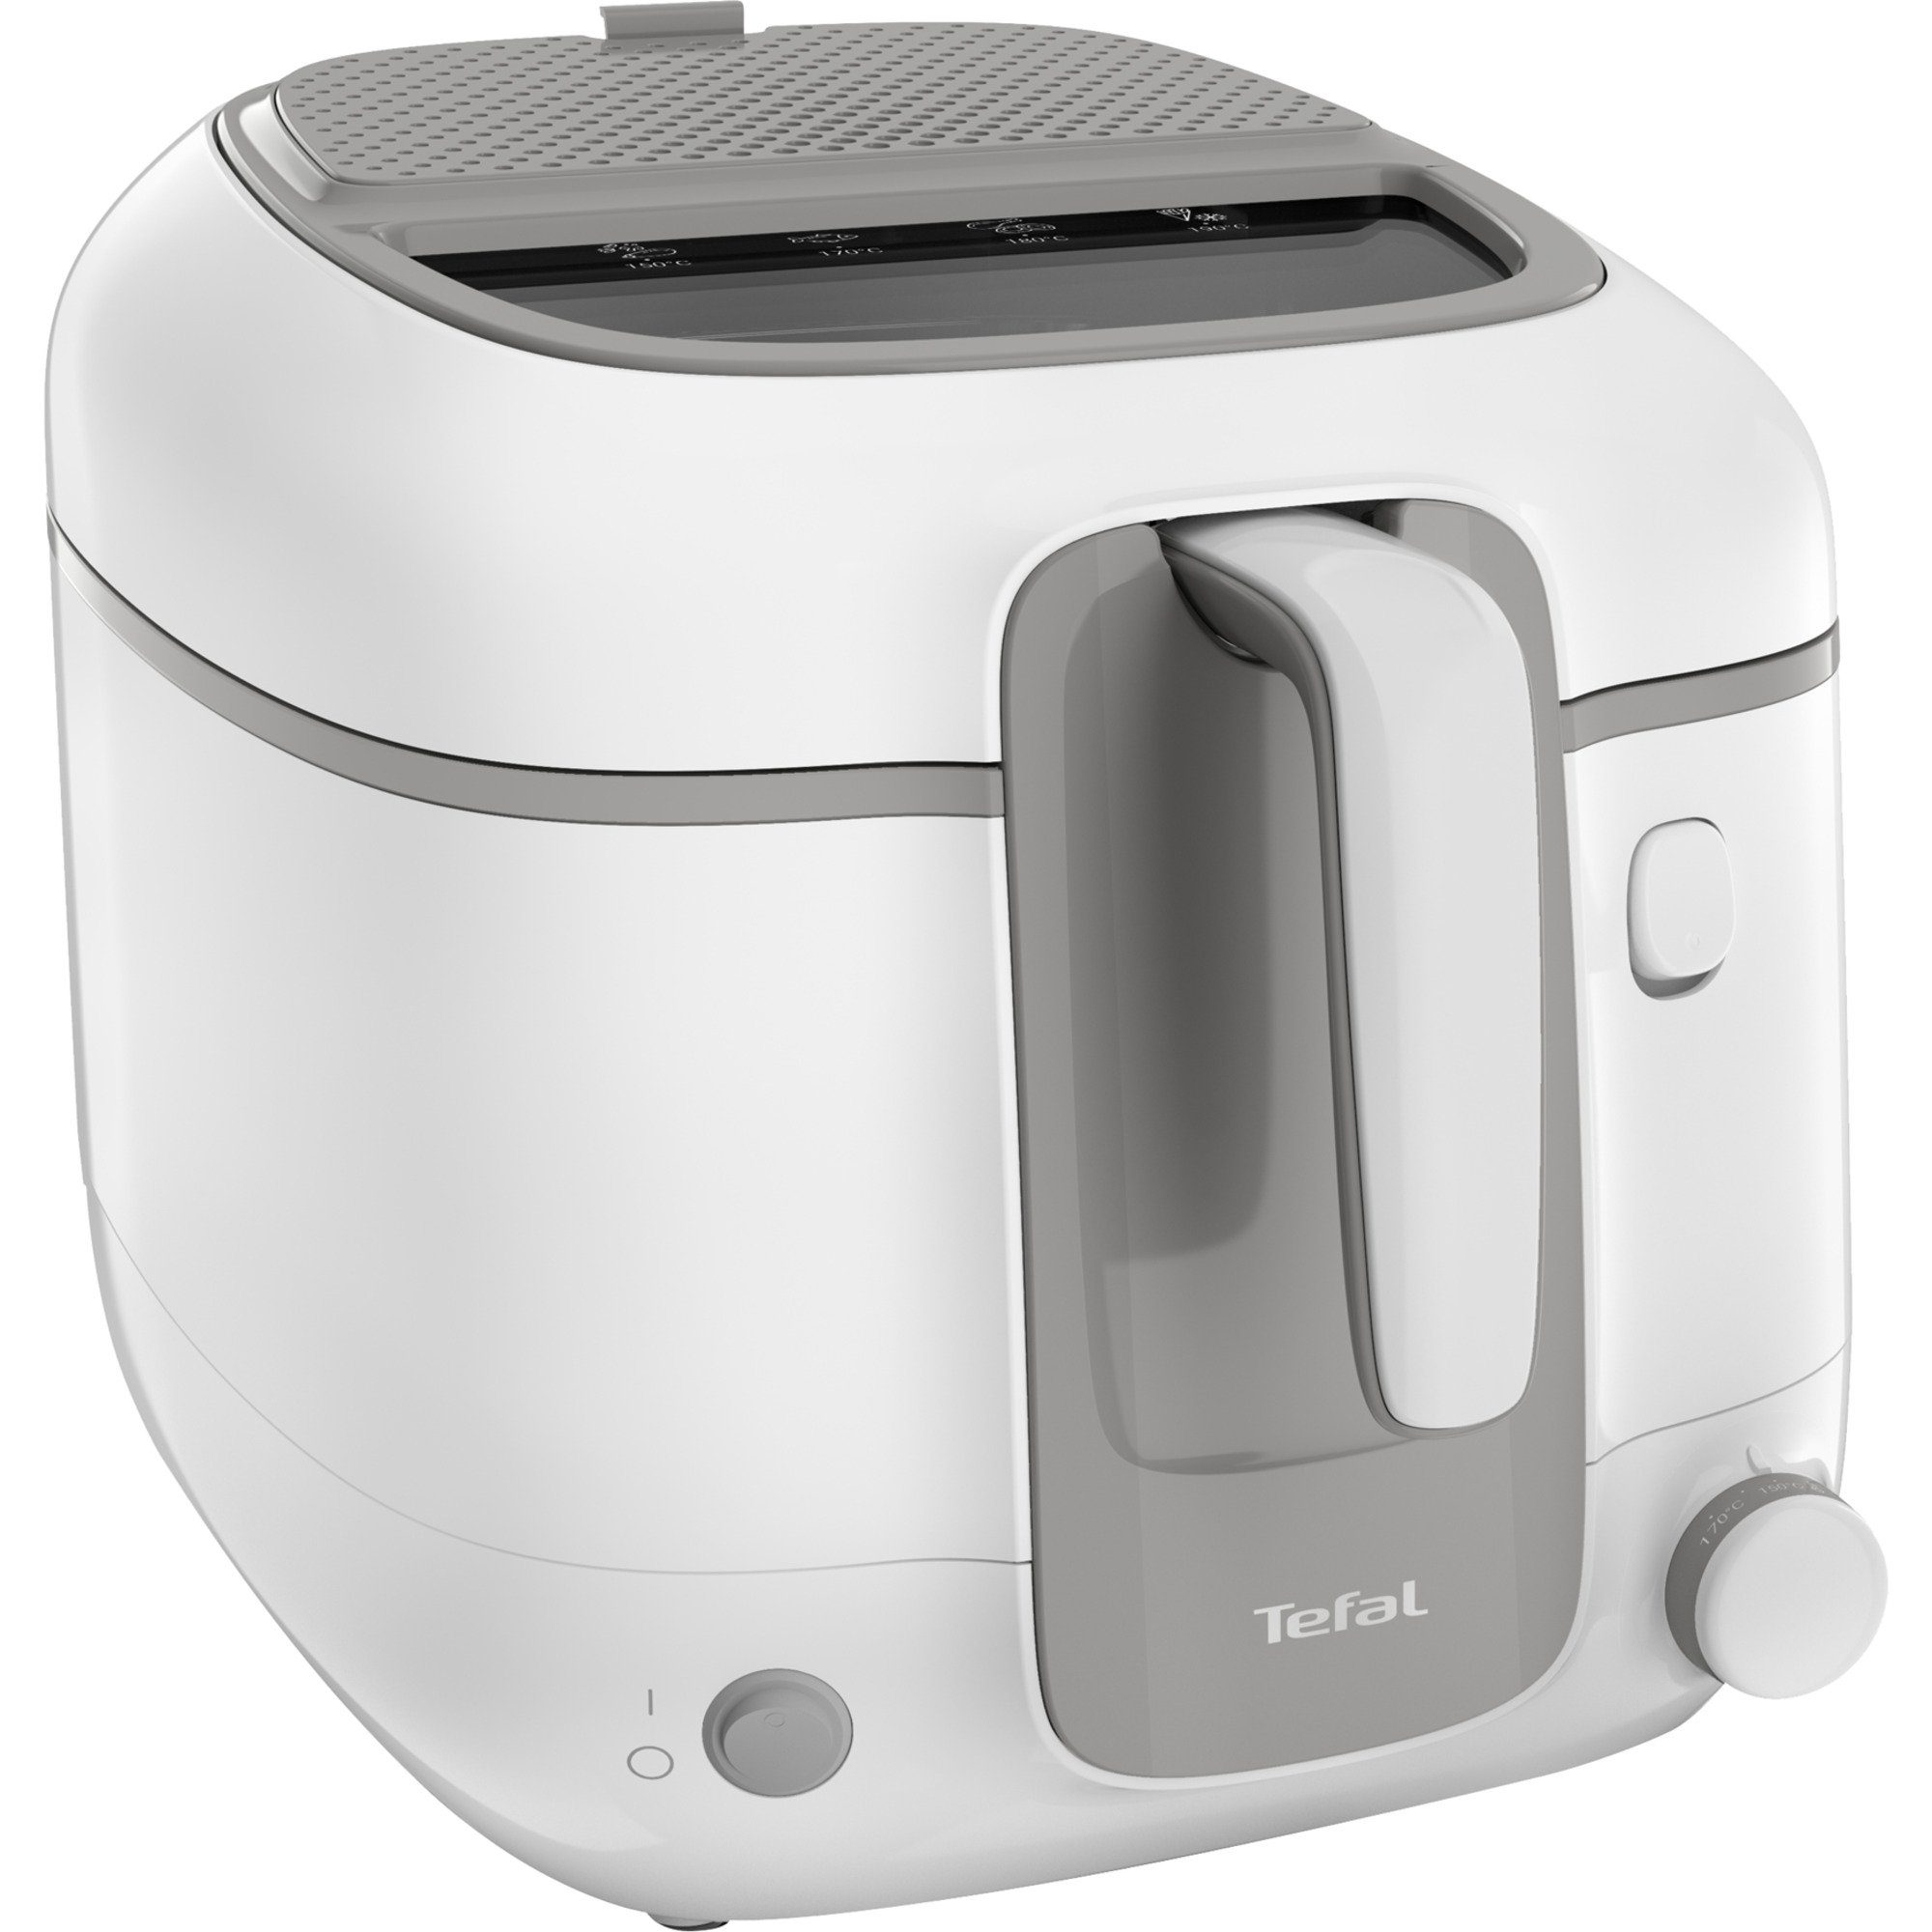 Tefal Fritteuse Super Uno Access FR3100